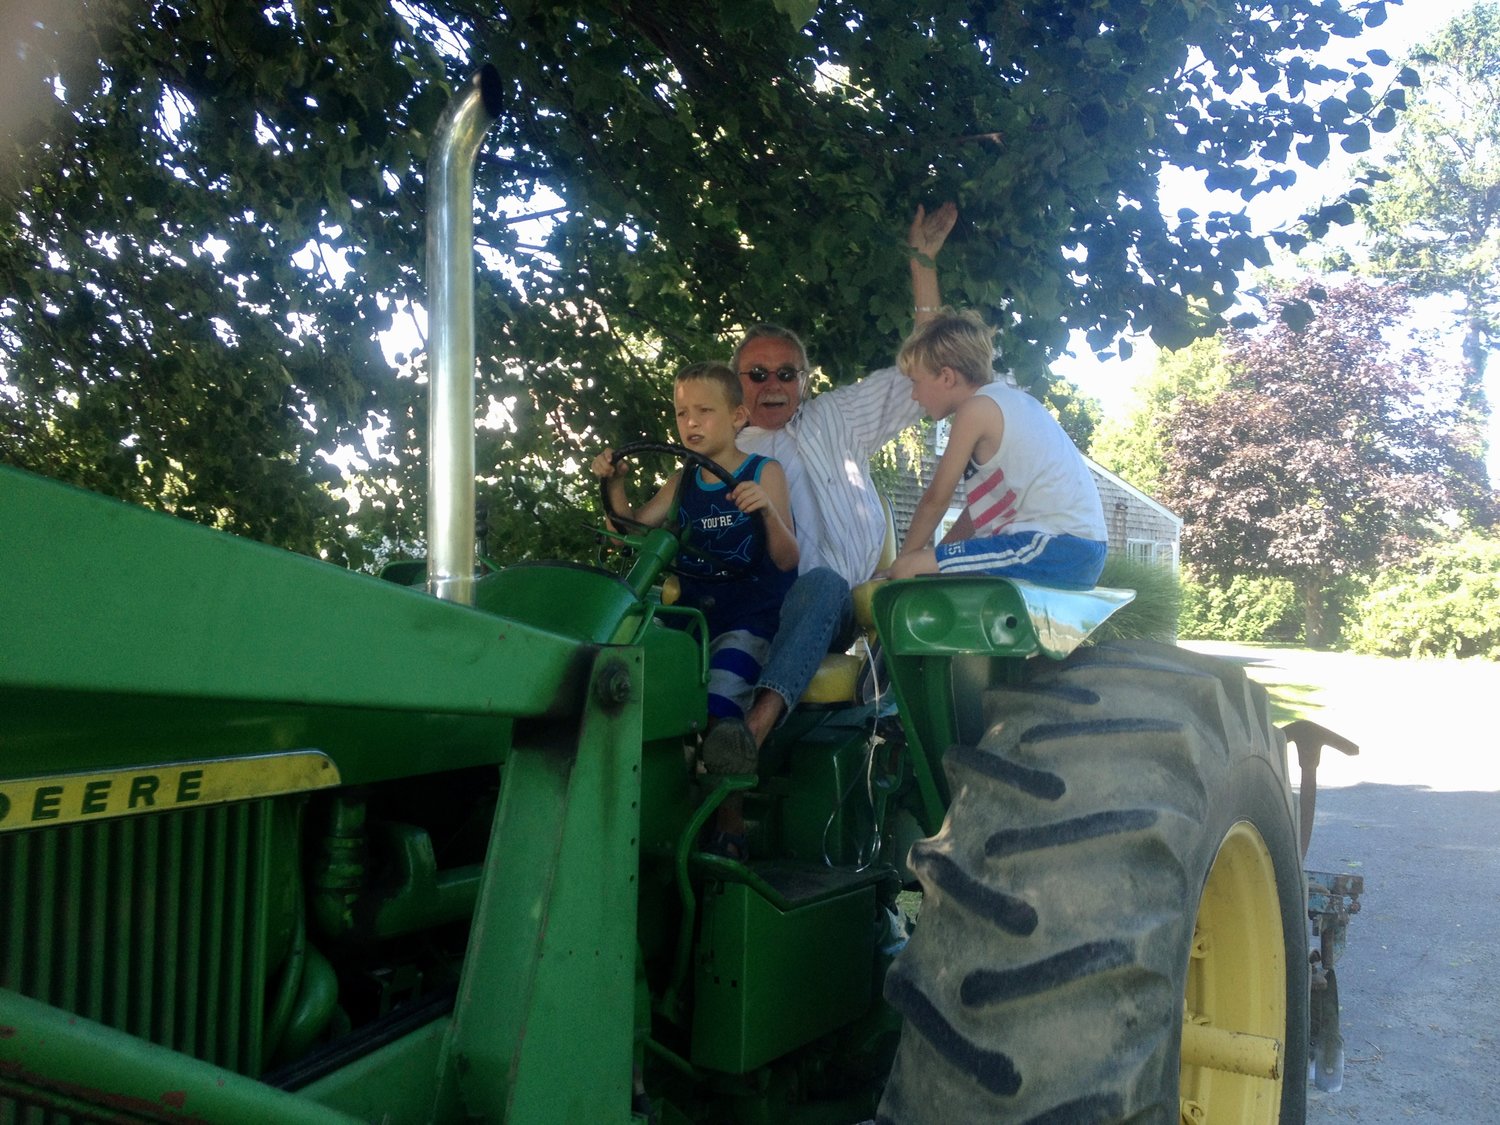 Coll Walker gives some of his grandchildren a ride in a tractor in this family photo.